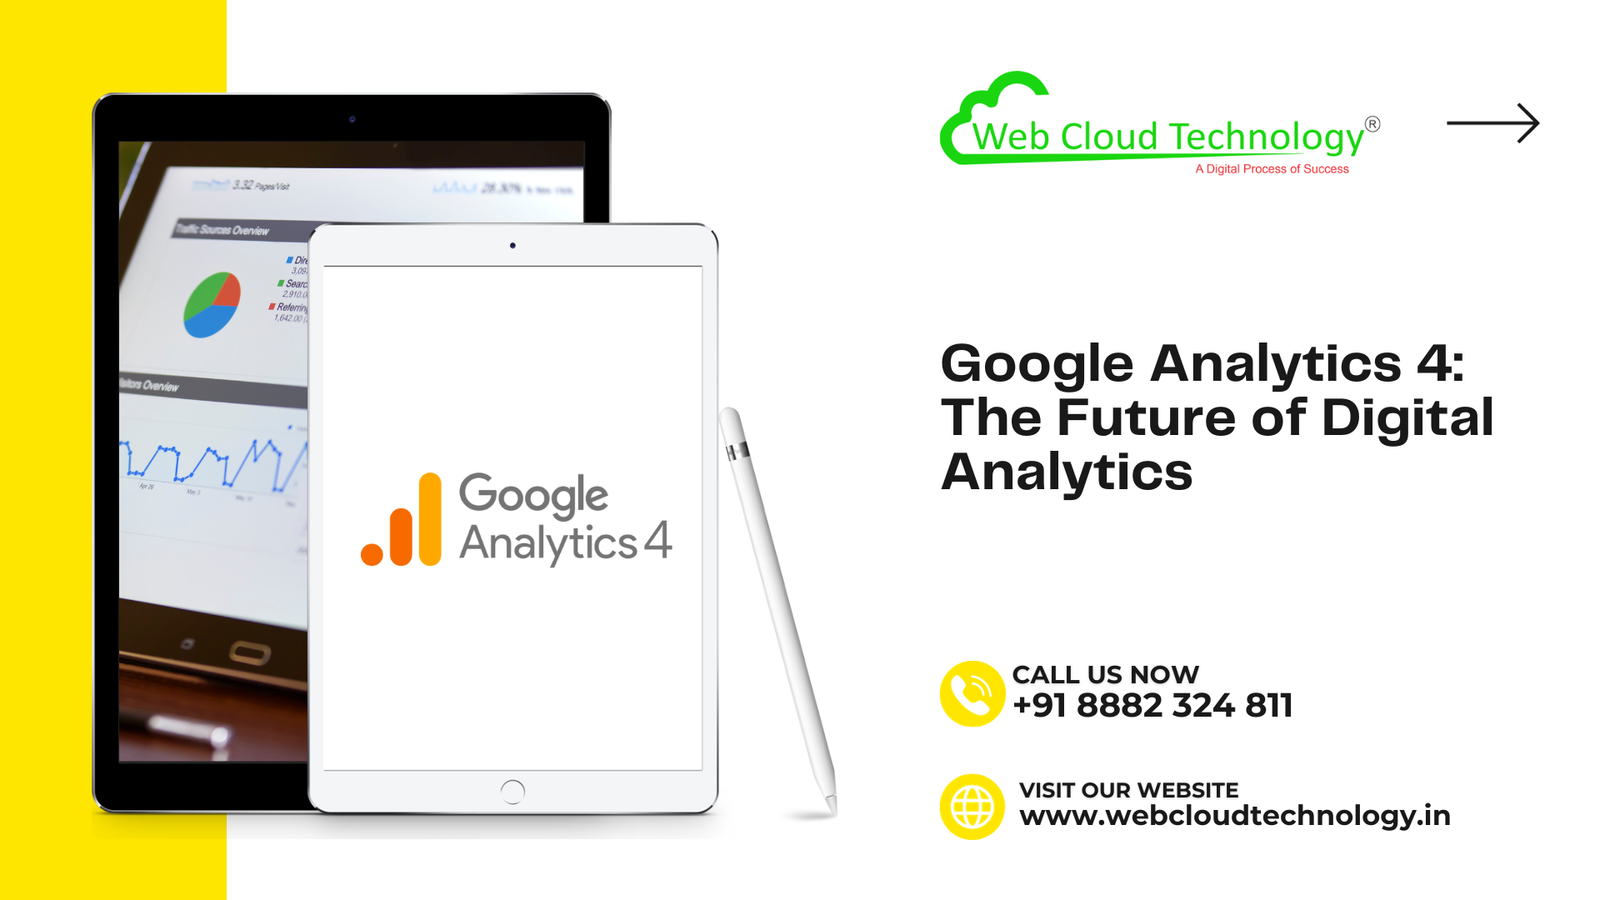 Google Analytics 4 (GA4) is the next generation of Google Analytics, and it's here to help businesses of all sizes get a more complete and accurate view of their customers.